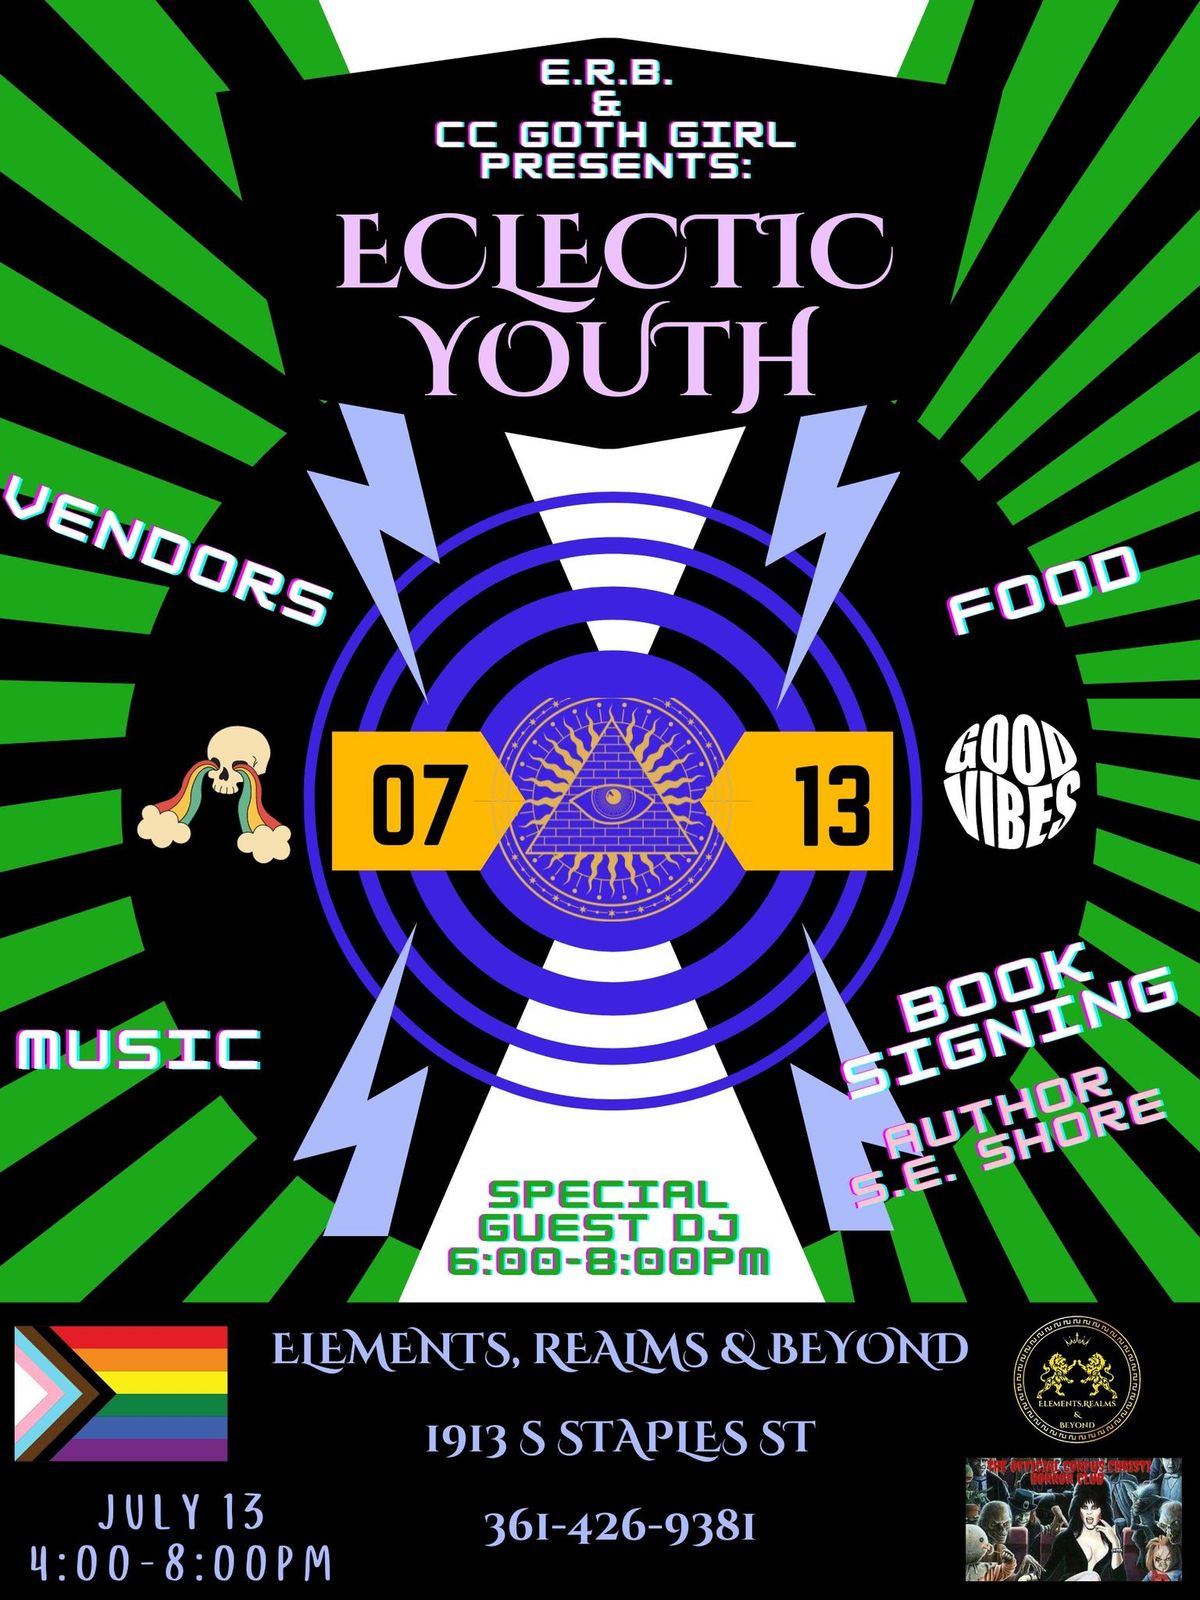 Eclectic Youth Pop Up